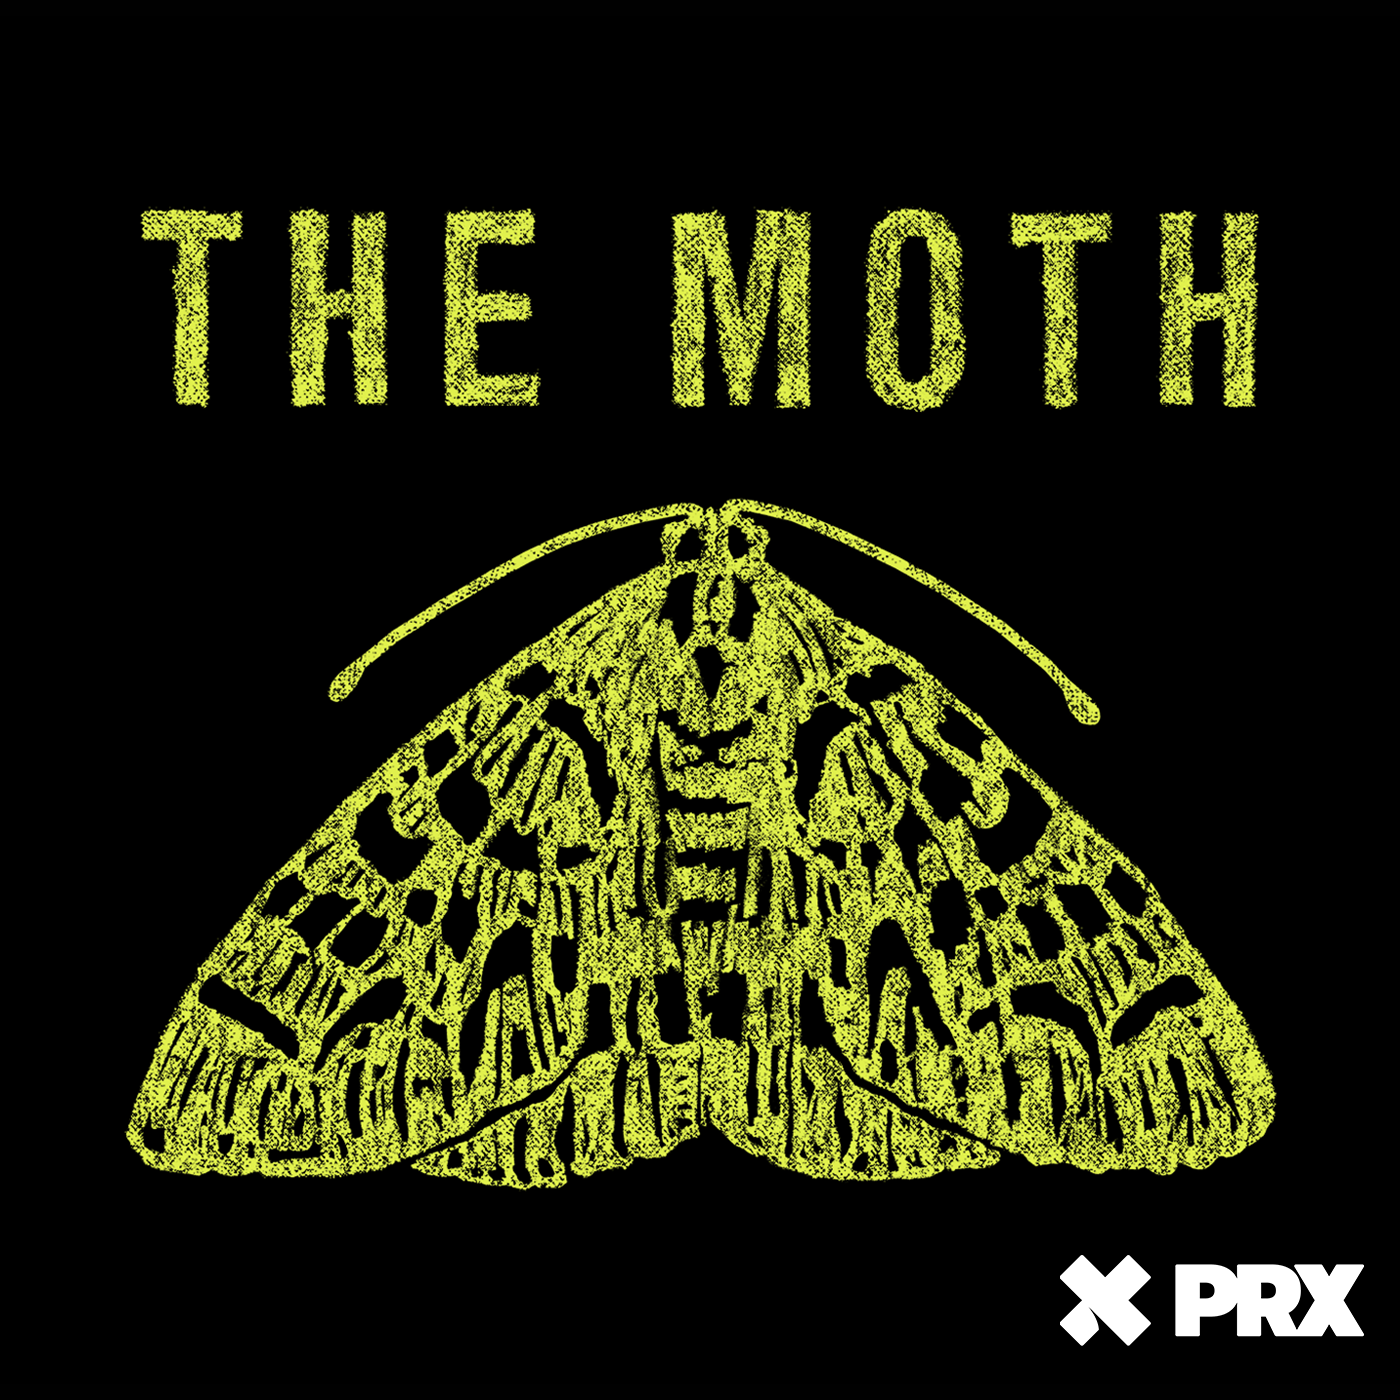 The Moth Radio Hour: One In a Million